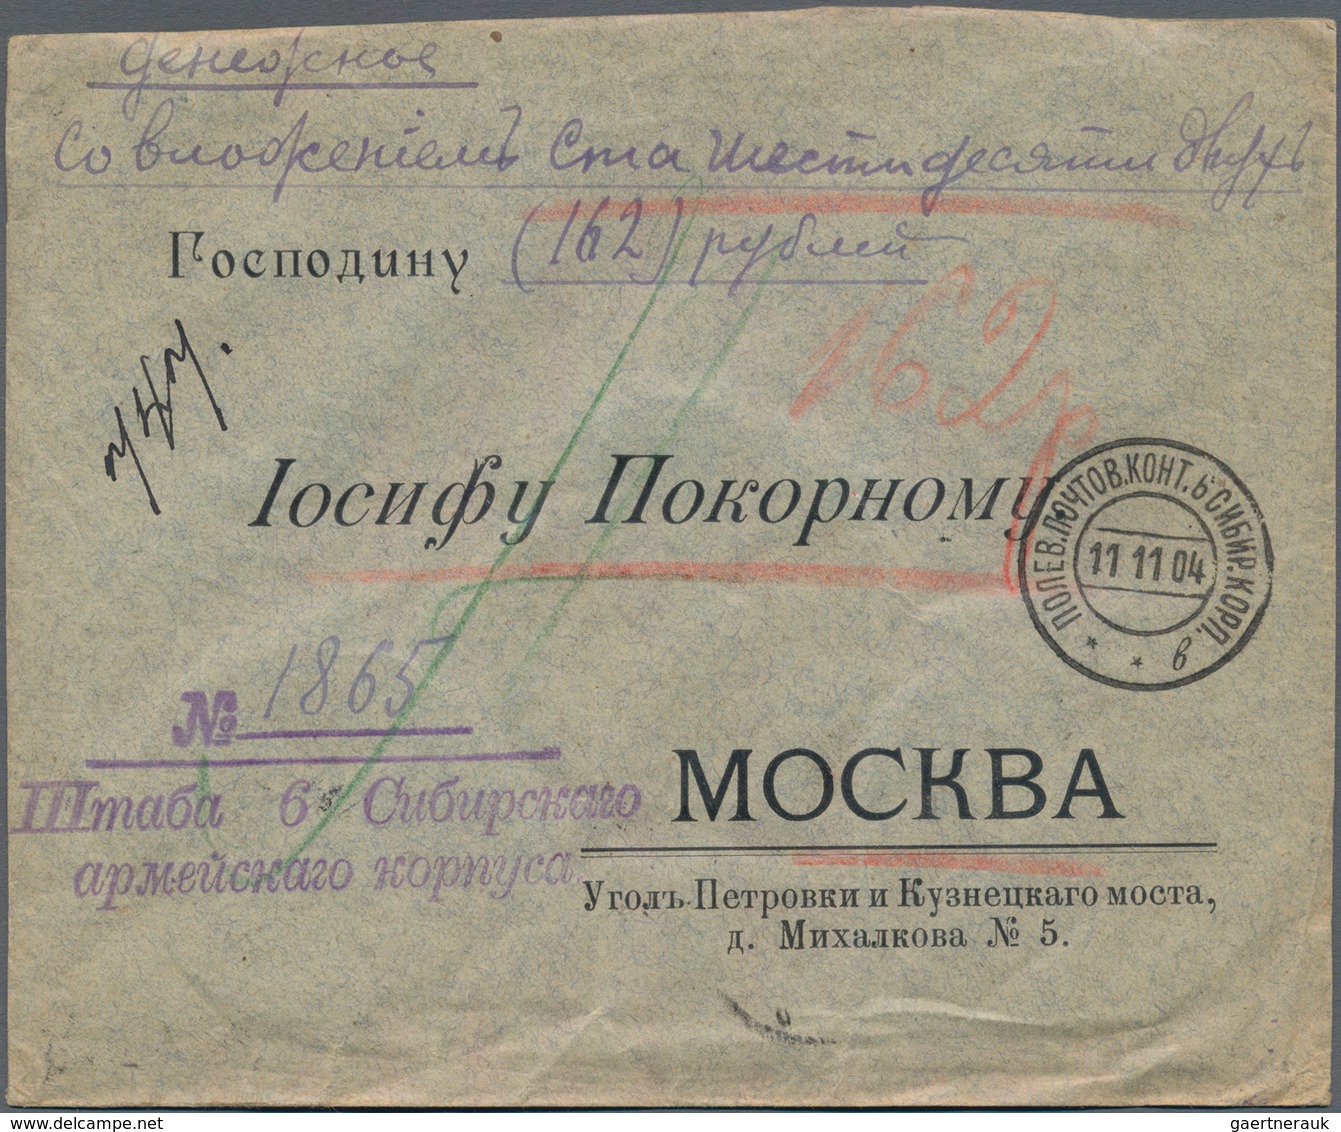 Russische Post In China: 11.11.1904 Russo-Japanese War Insured Money-letter For 162 Roubles Franked - China